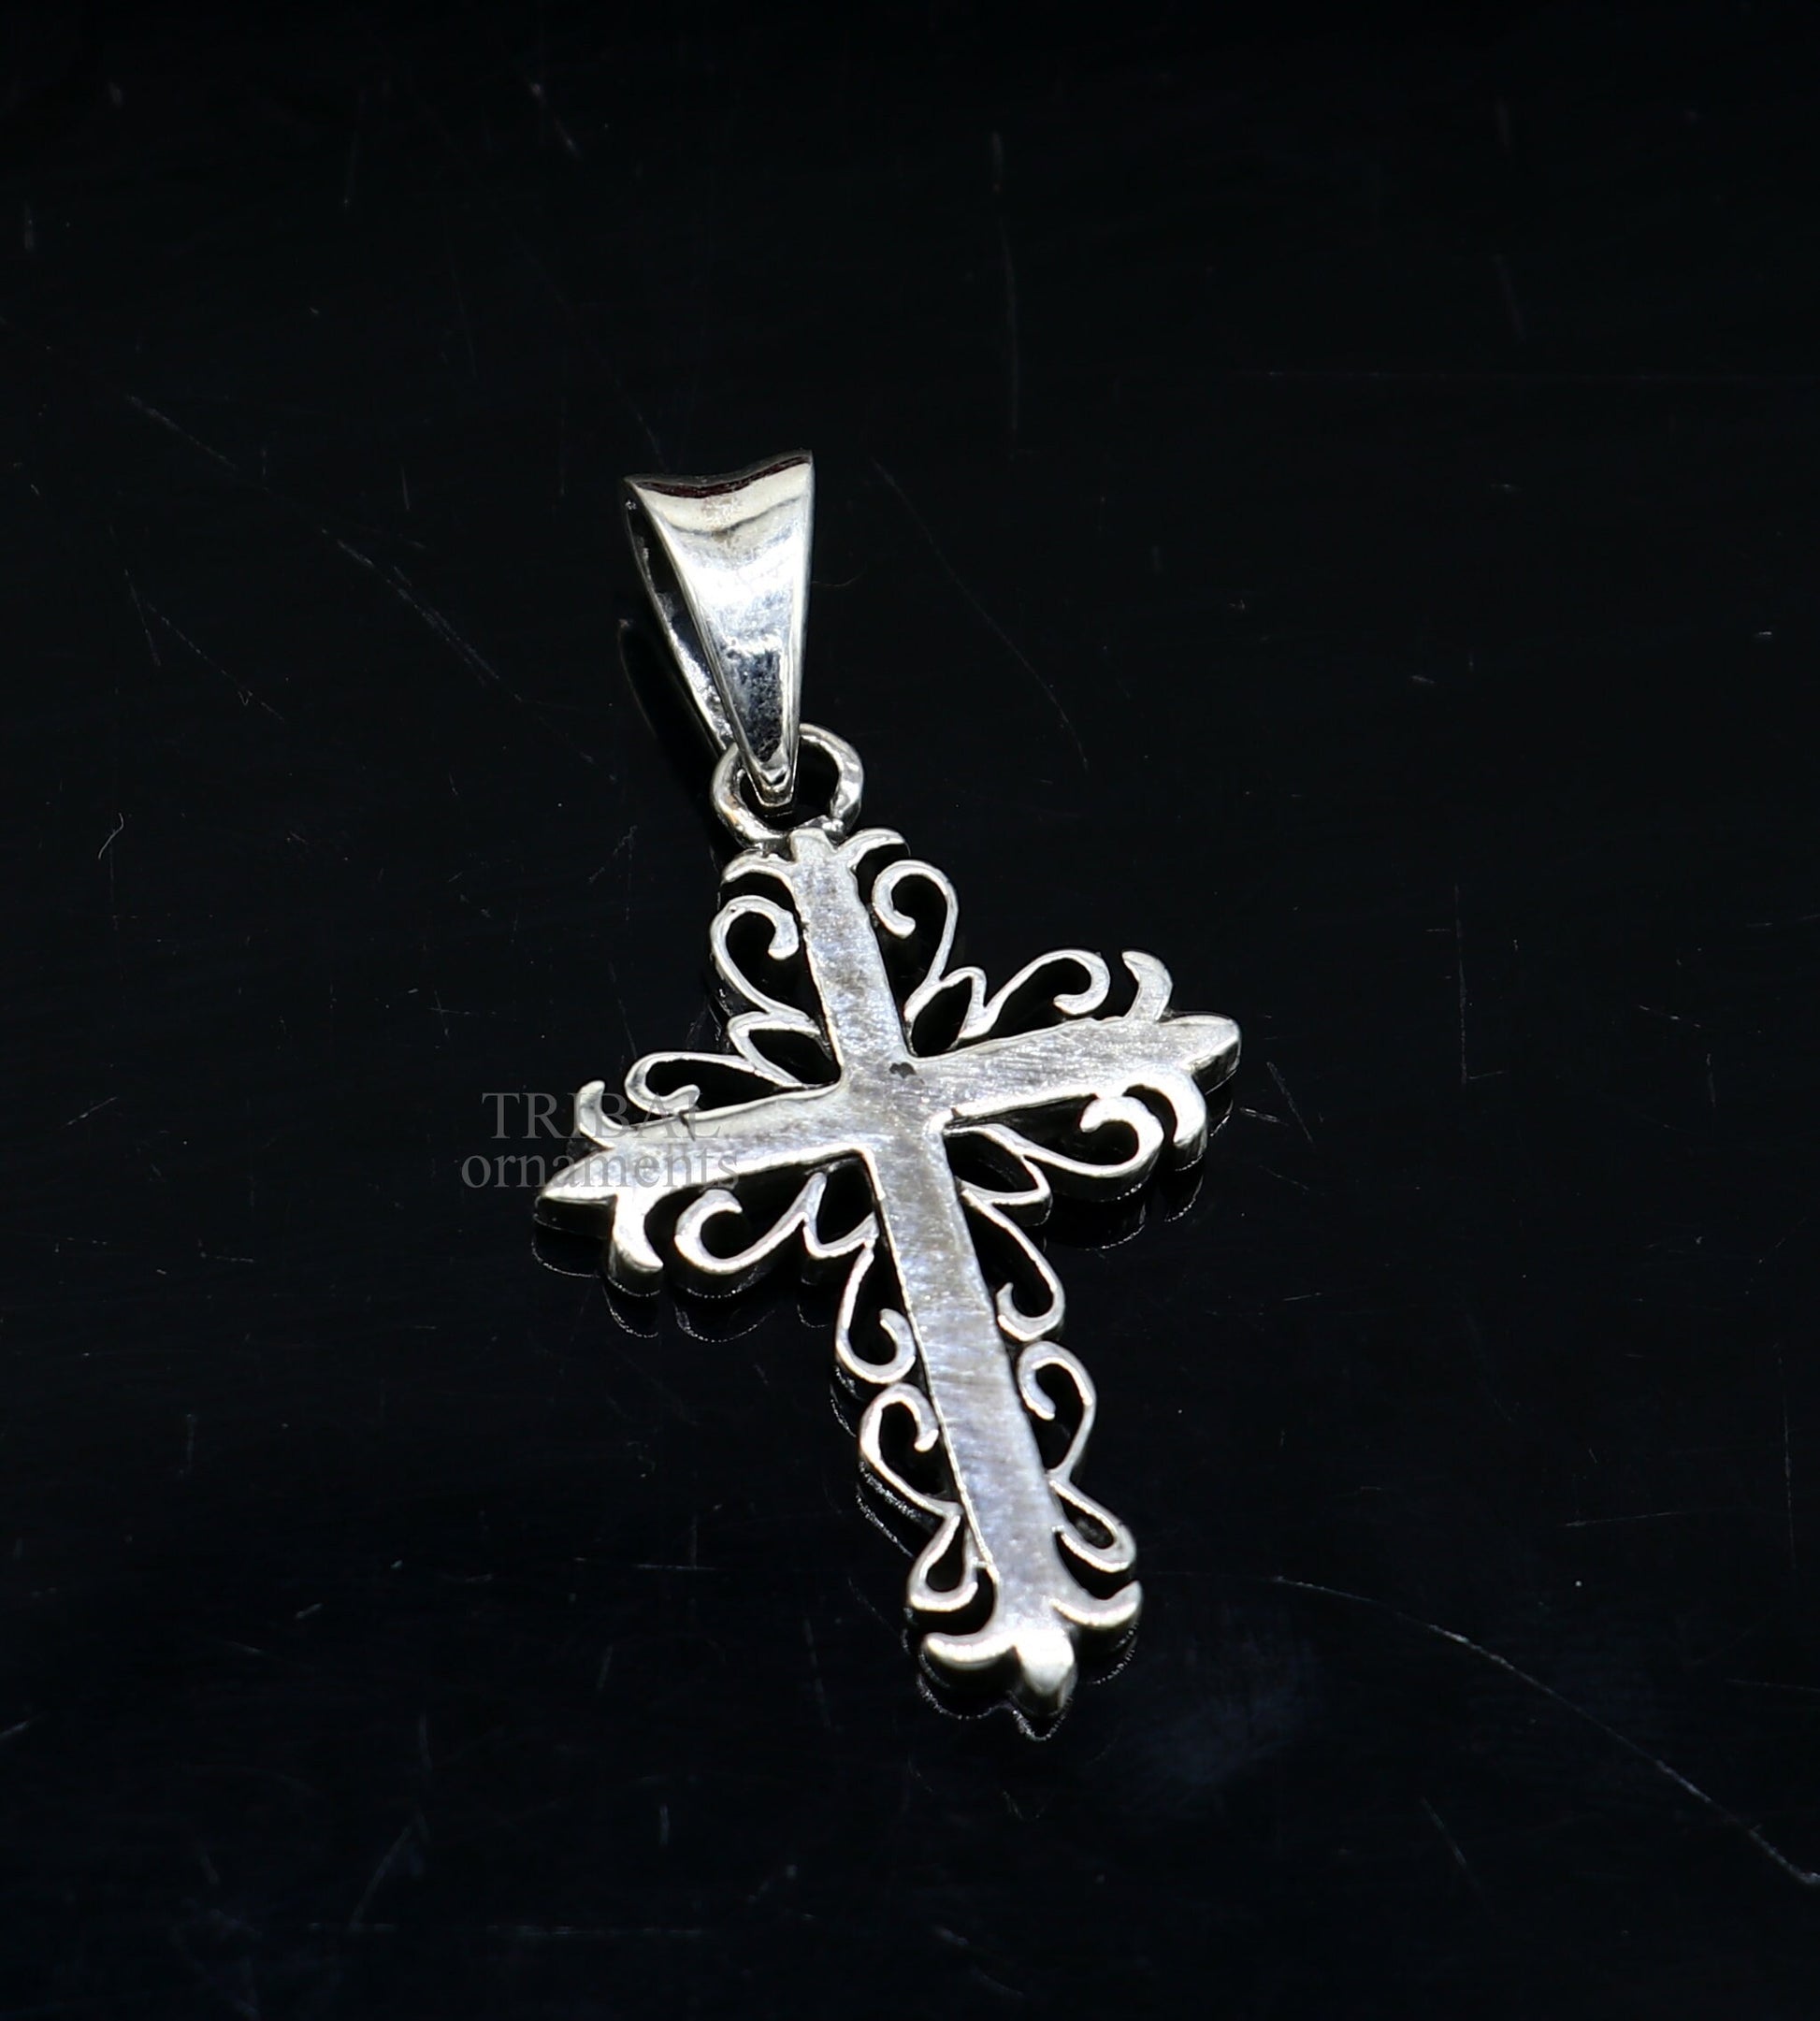 925 sterling silver holy cross pendant, excellent unique design stylish unisex exclusive gift pendant jewelry from india ssp1629 - TRIBAL ORNAMENTS